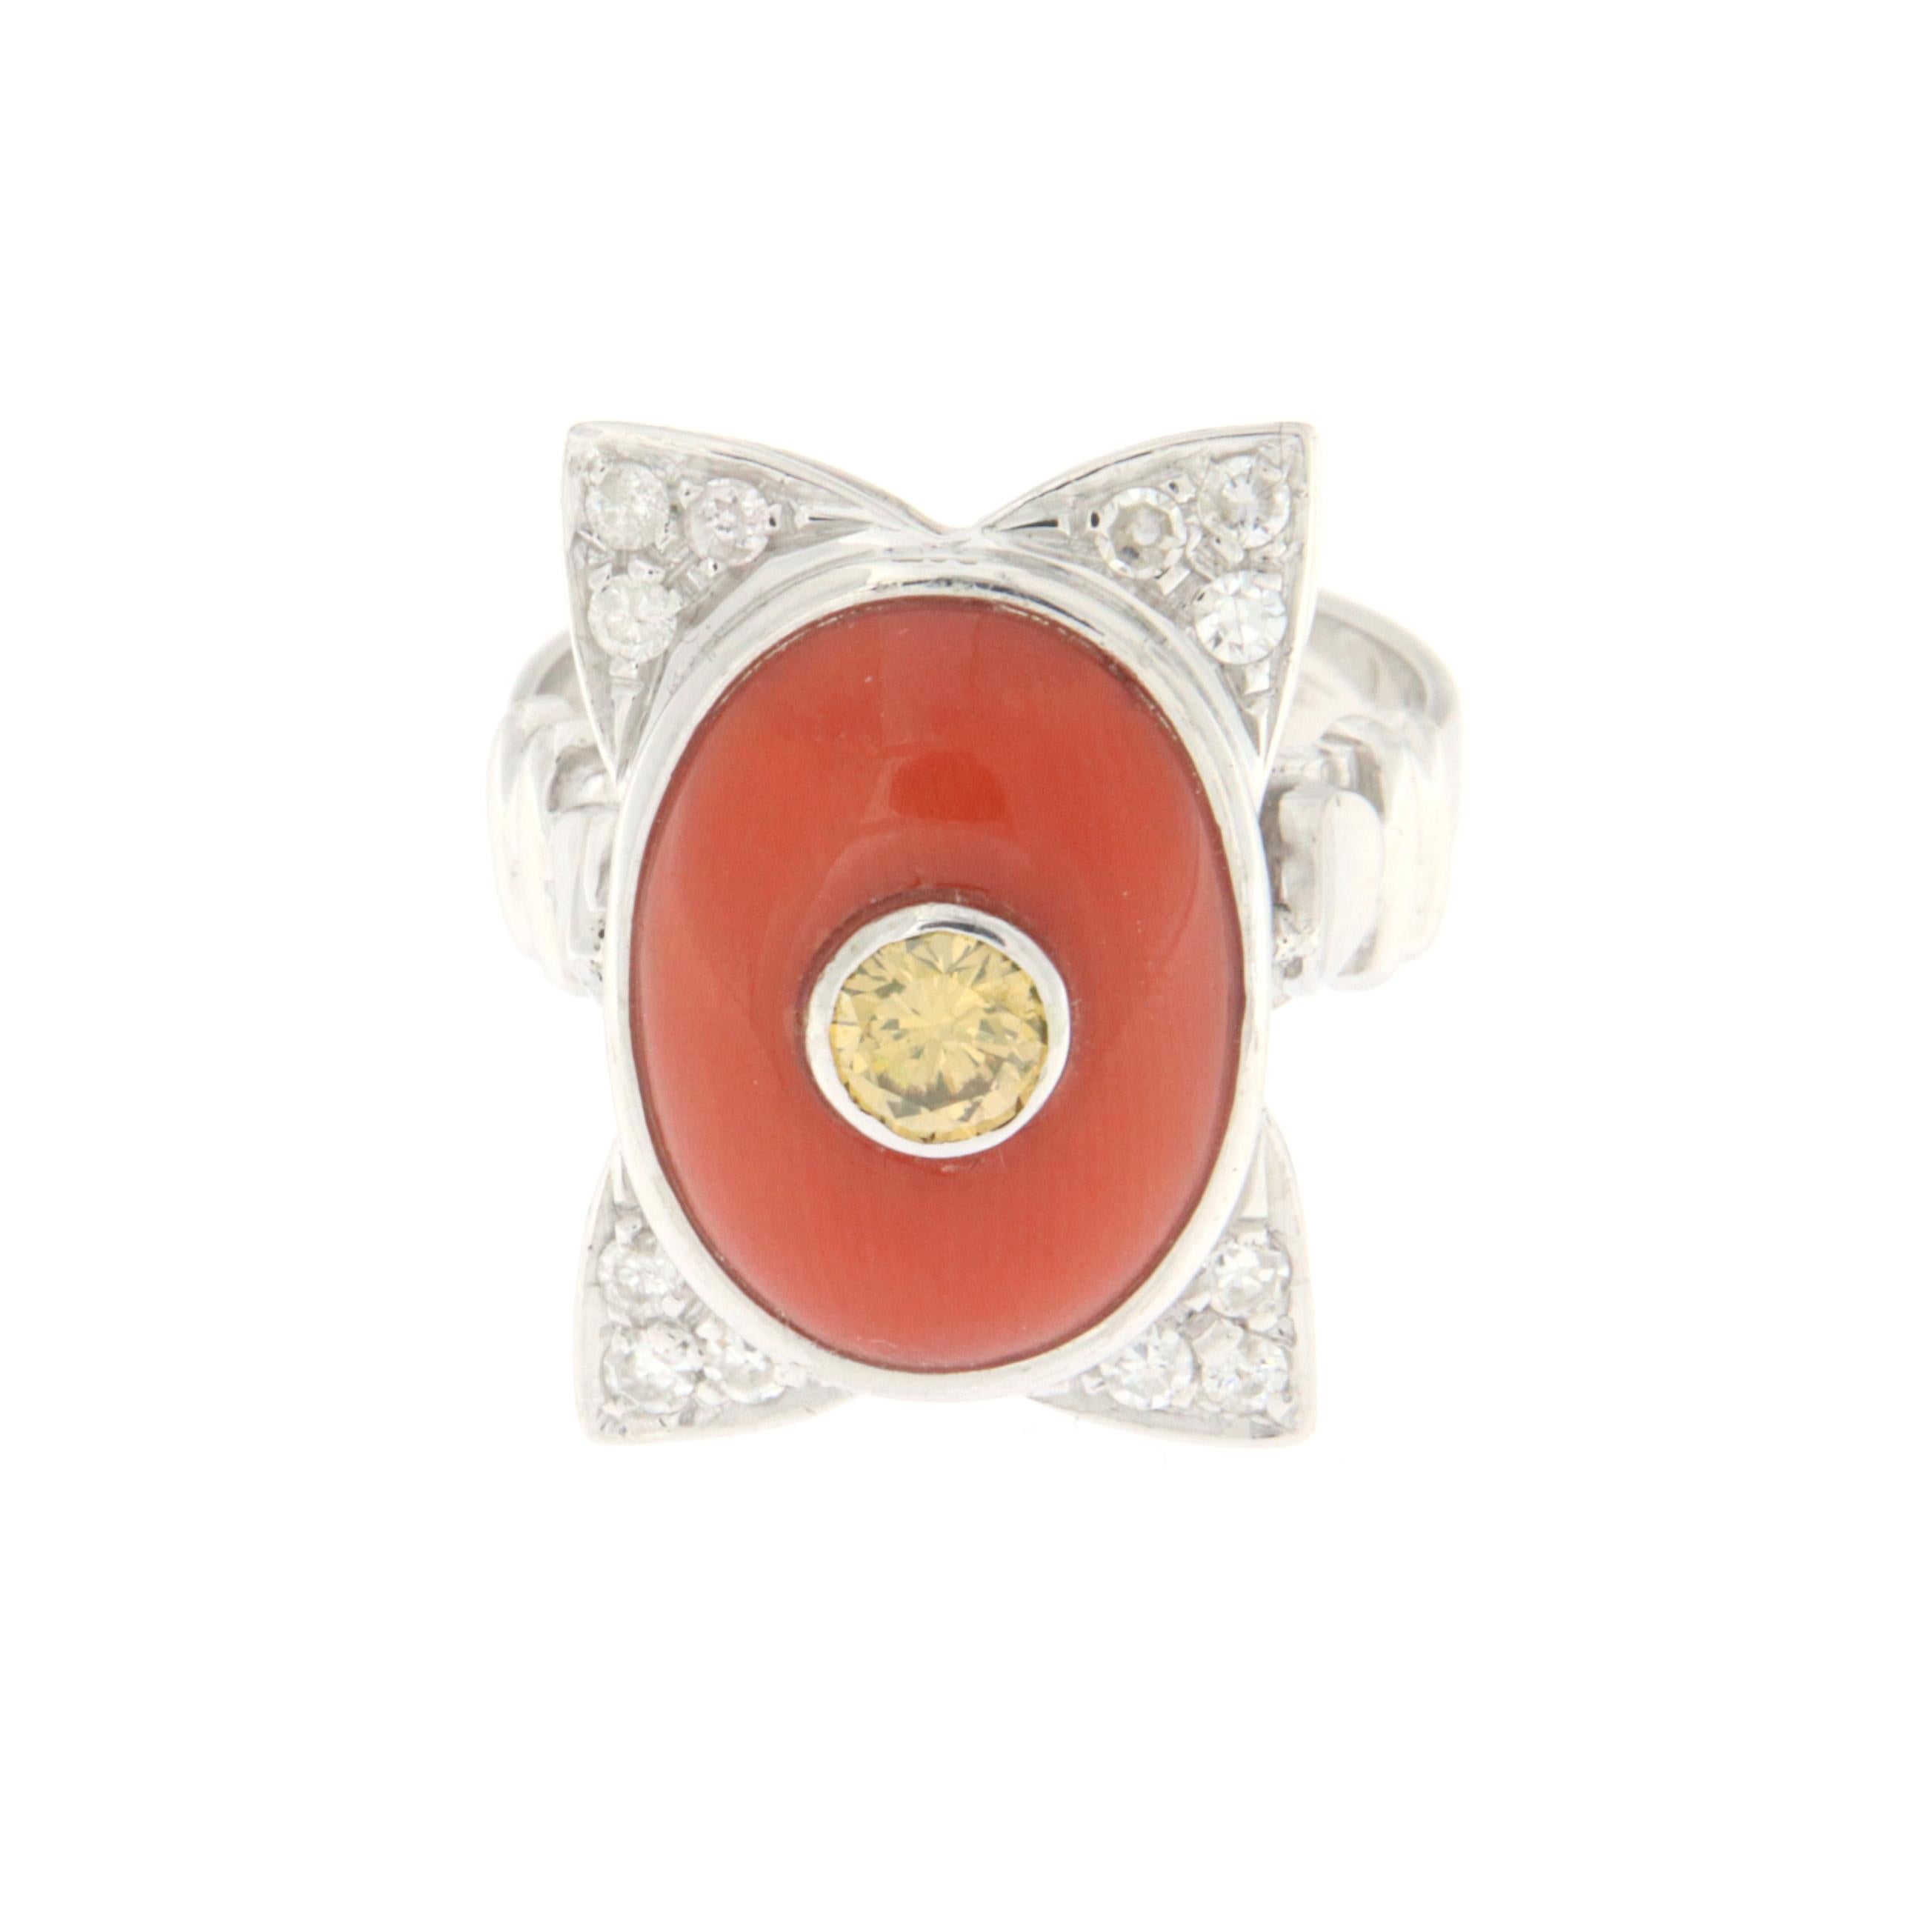 This exquisite 18-karat white gold ring is a masterpiece of design and luxury. At its center, it features an oval-cut natural coral of deep and enticing color, enclosing within it a 0.30-carat yellow diamond. This central gem, unique in its kind,